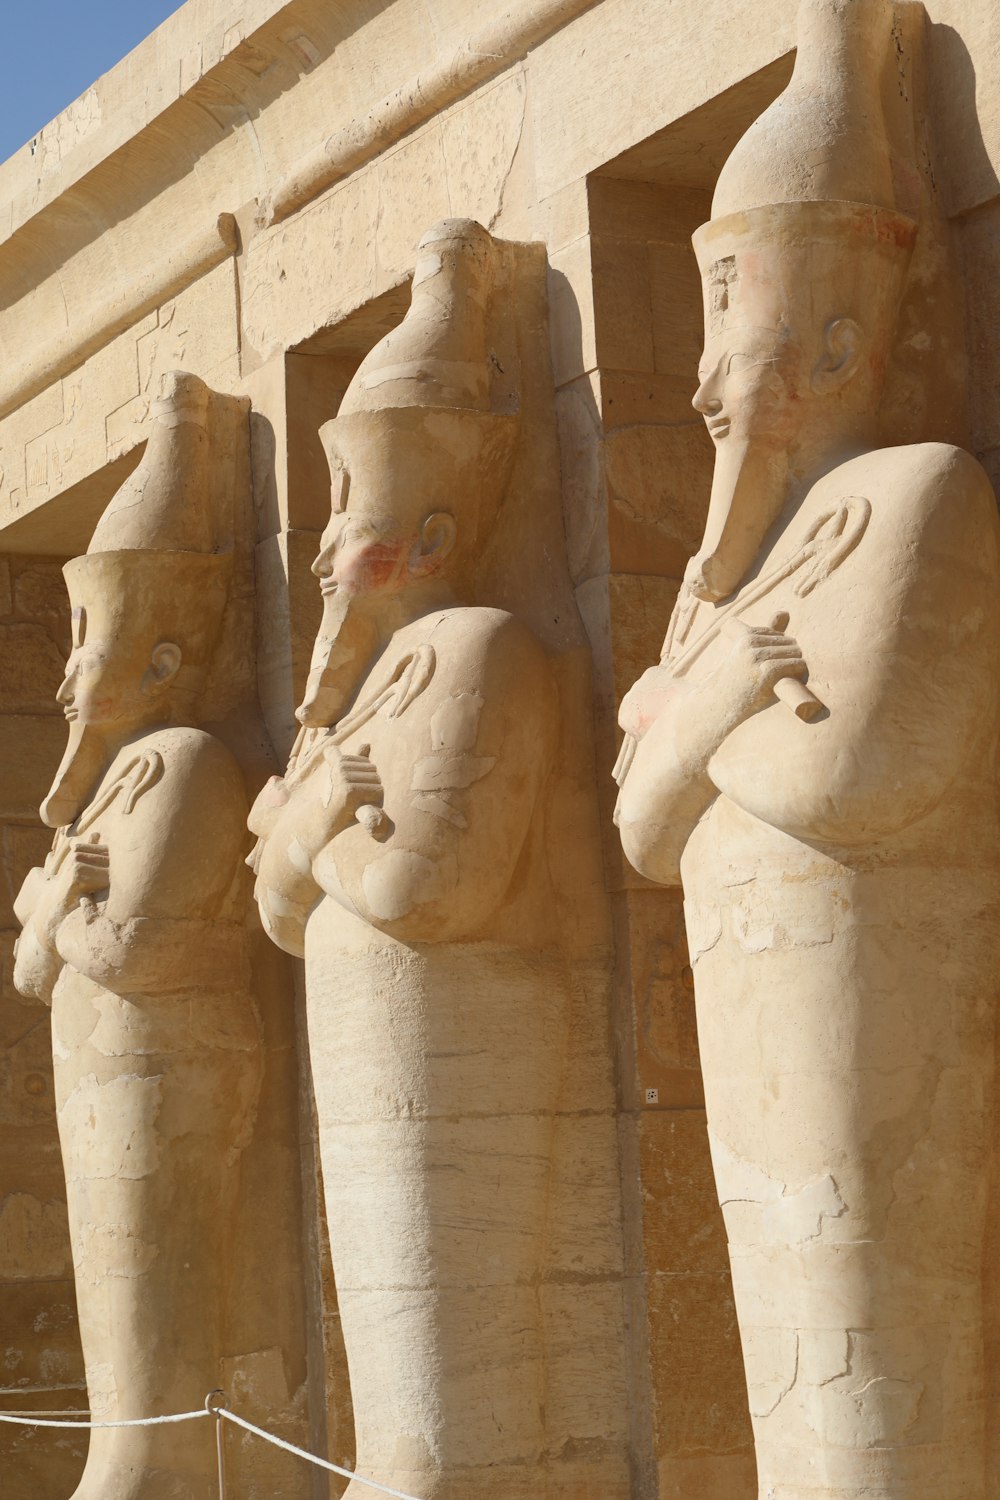 a row of statues of pharaohs in front of a building